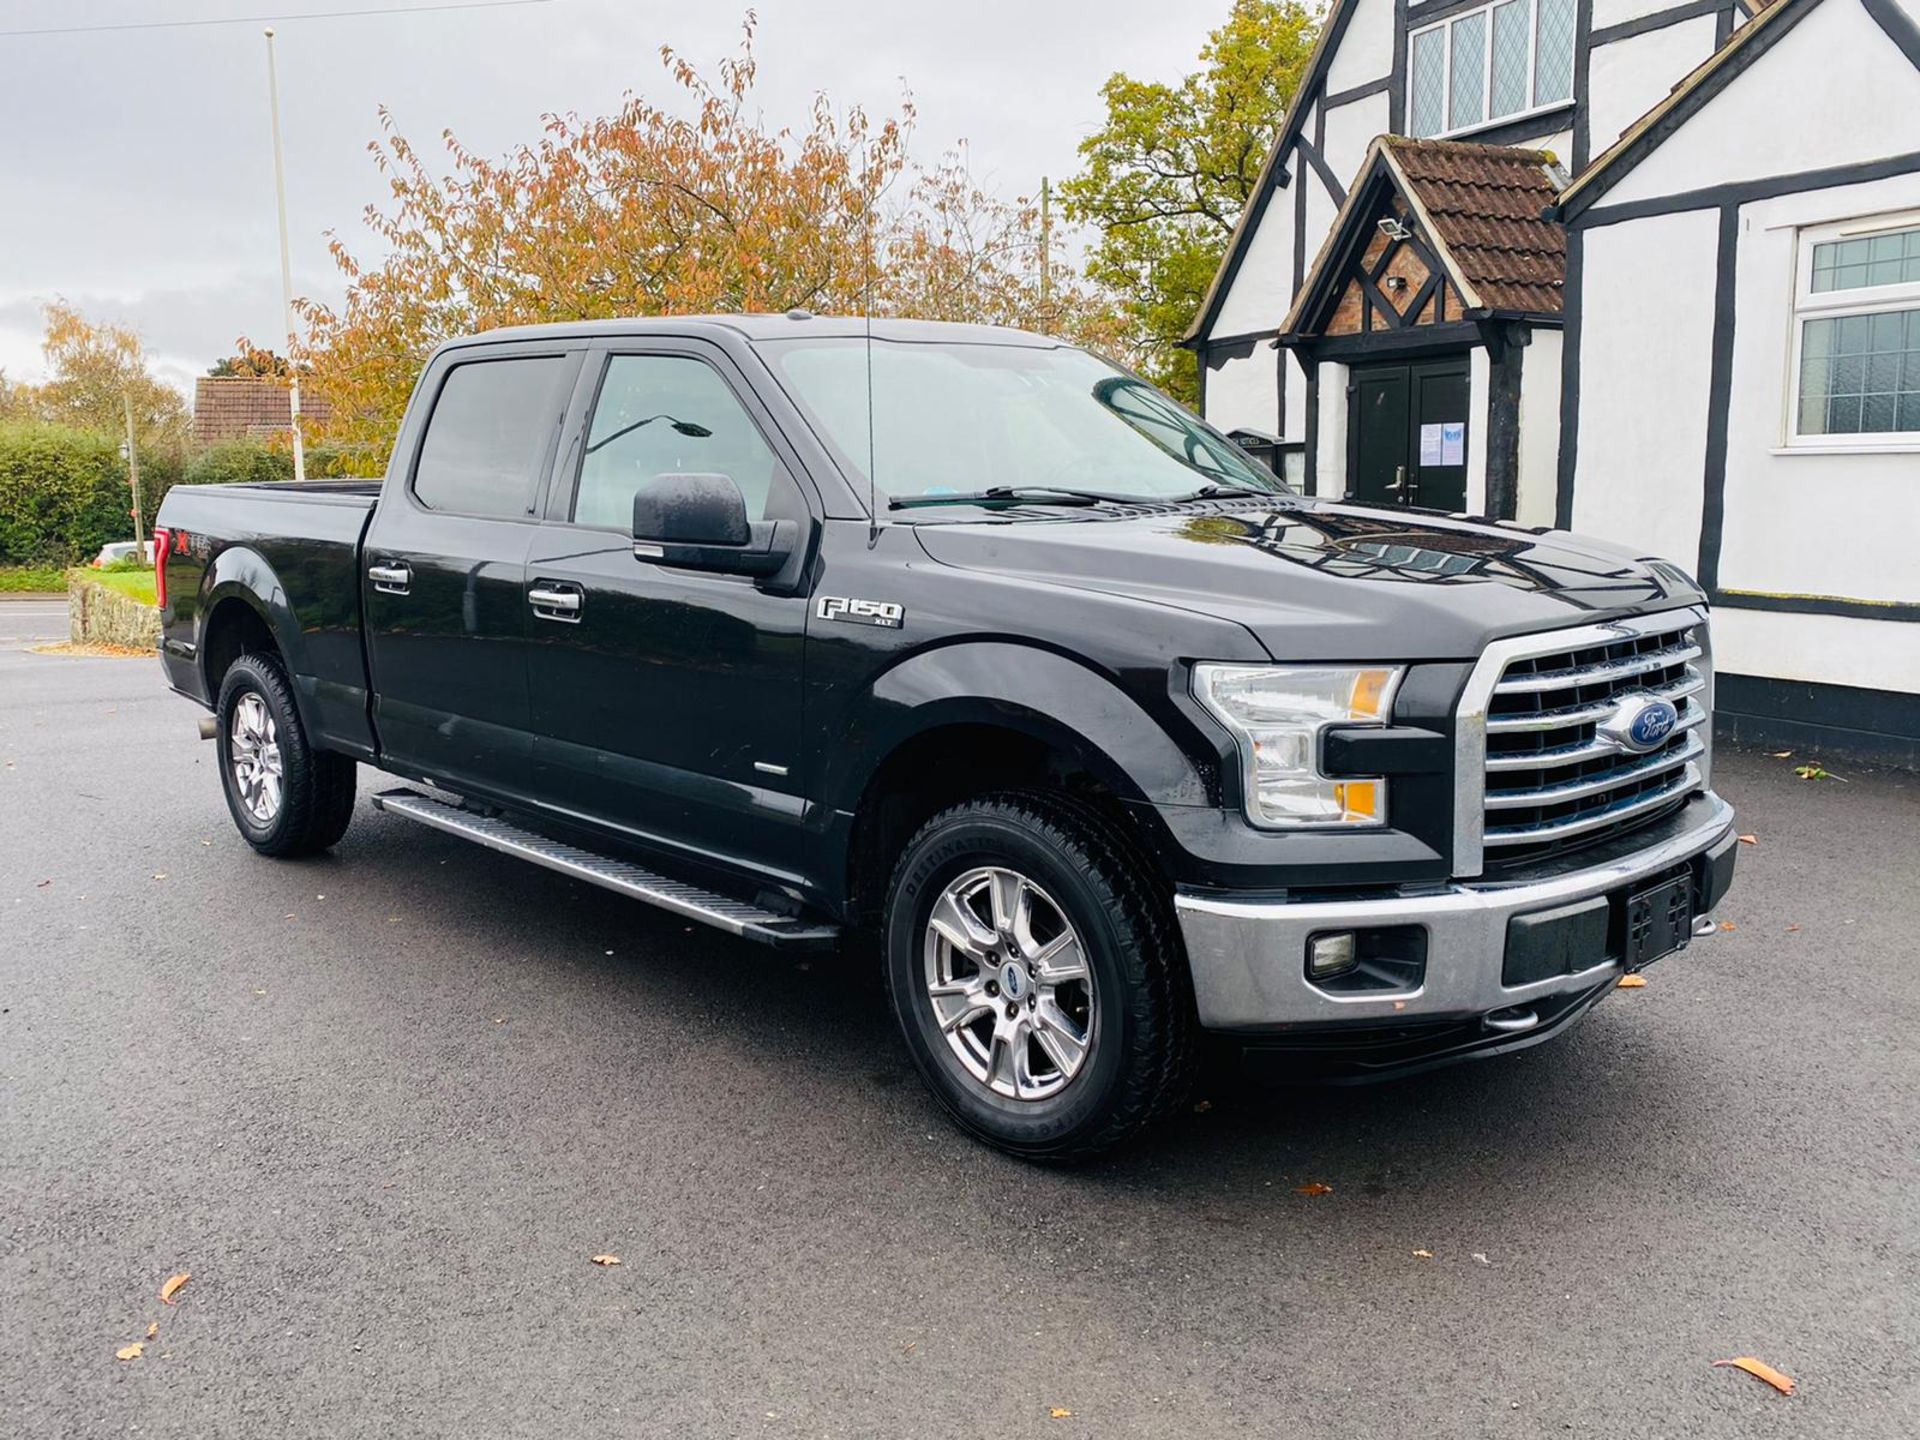 Ford F-150 3.5L V6 Ecoboost XLT Supercrew Cab XTR Spec 4x4 - 2015 Year - WOW! Fresh Import - Image 16 of 56